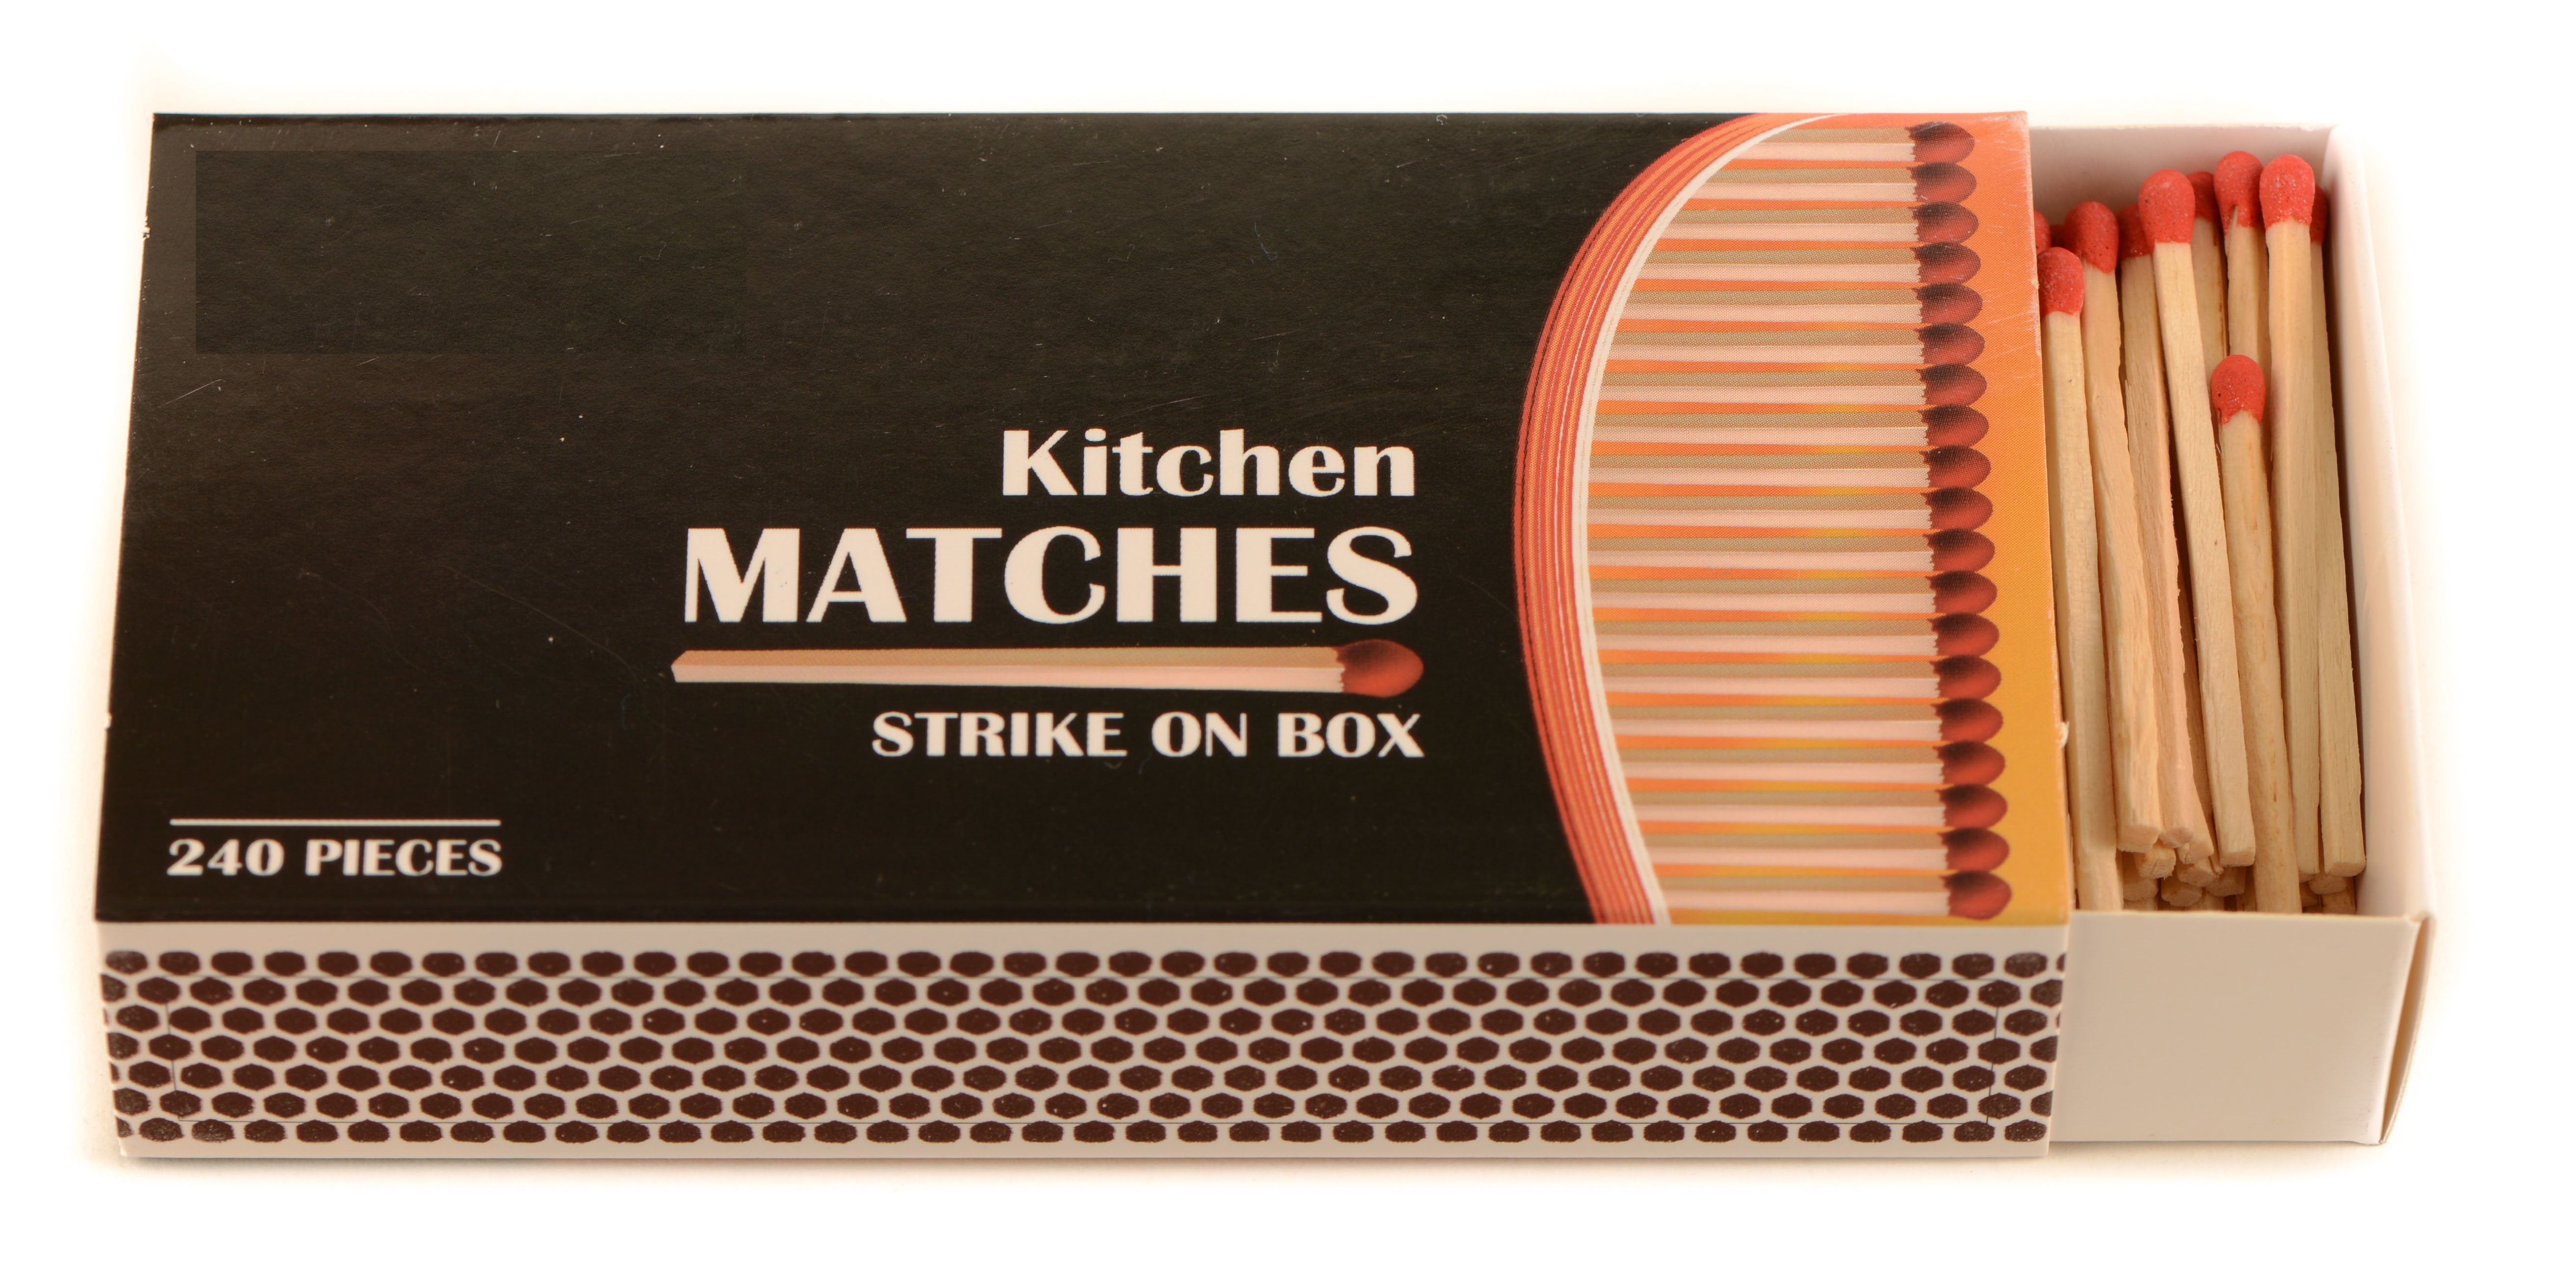 30 Pack] Wooden Strike on Box Matches - 240 Count Per Box